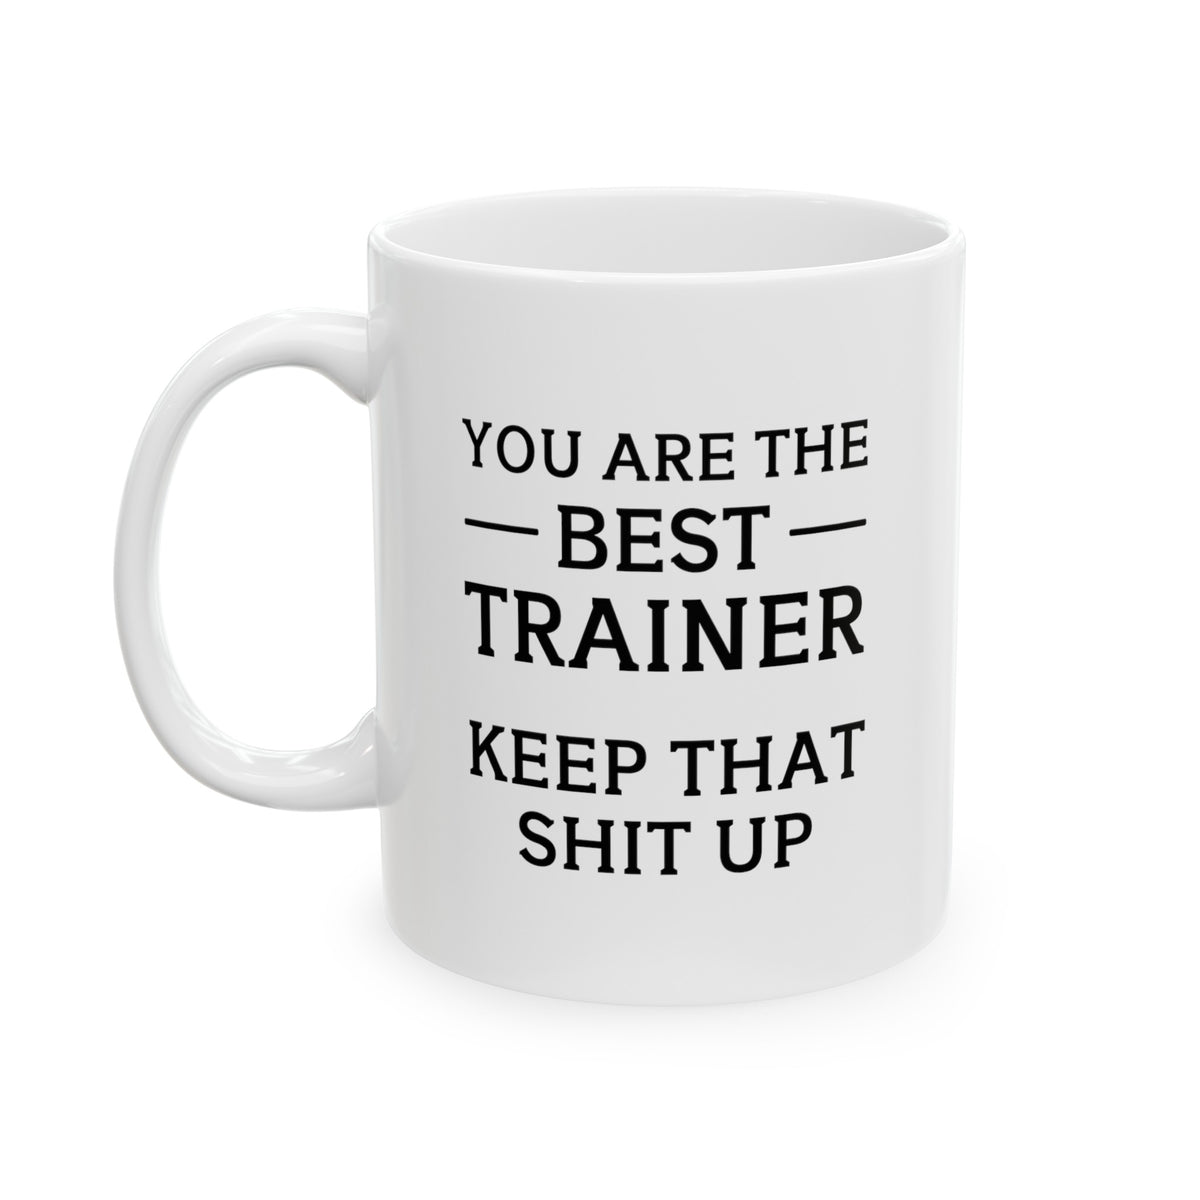 Personal Trainer Gifts - You Are The Best TRAINER.Coffee Mug - Gifts For Athletic Trainer Fitness Trainer Men Women